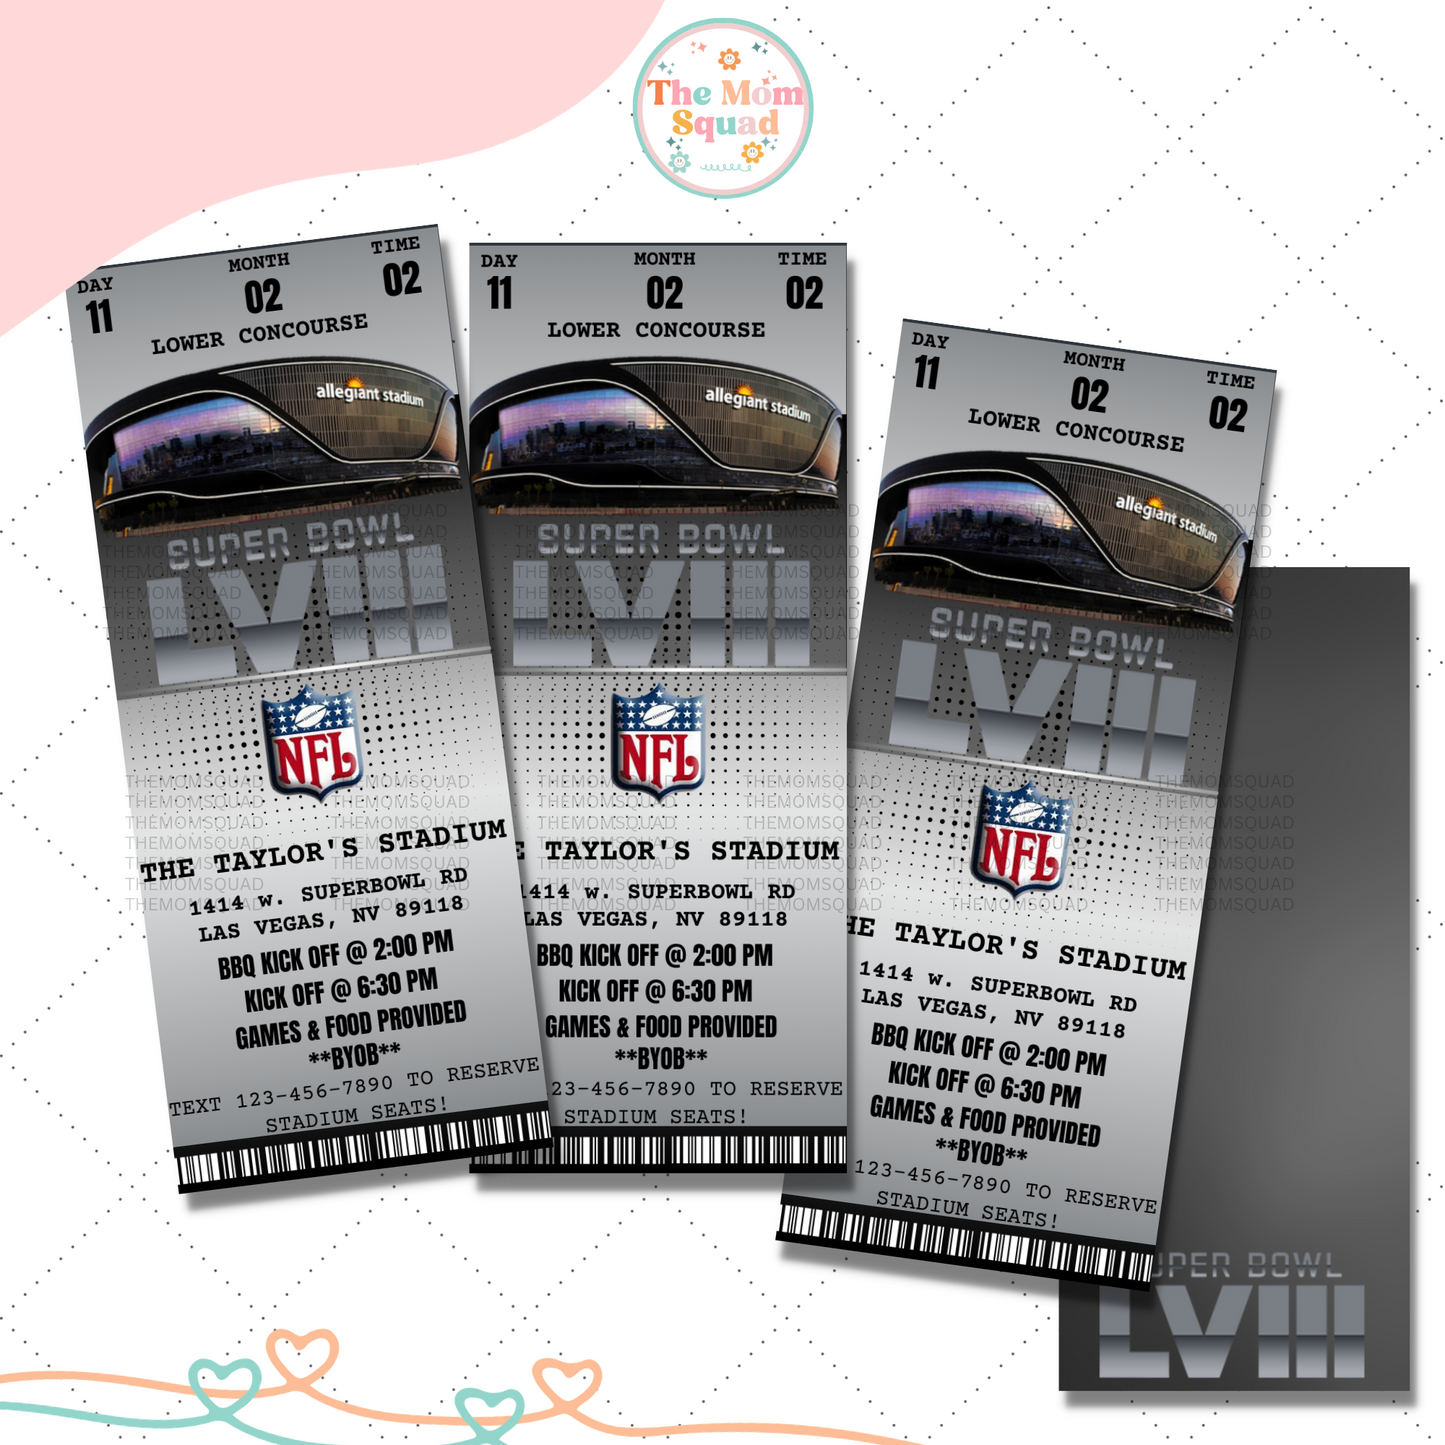 Super Bowl Party Ticket Invitation - Score Your Spot at the Ultimate Super Bowl Watch Party: Touchdowns, Tailgates, and Unmatched Excitement Await!